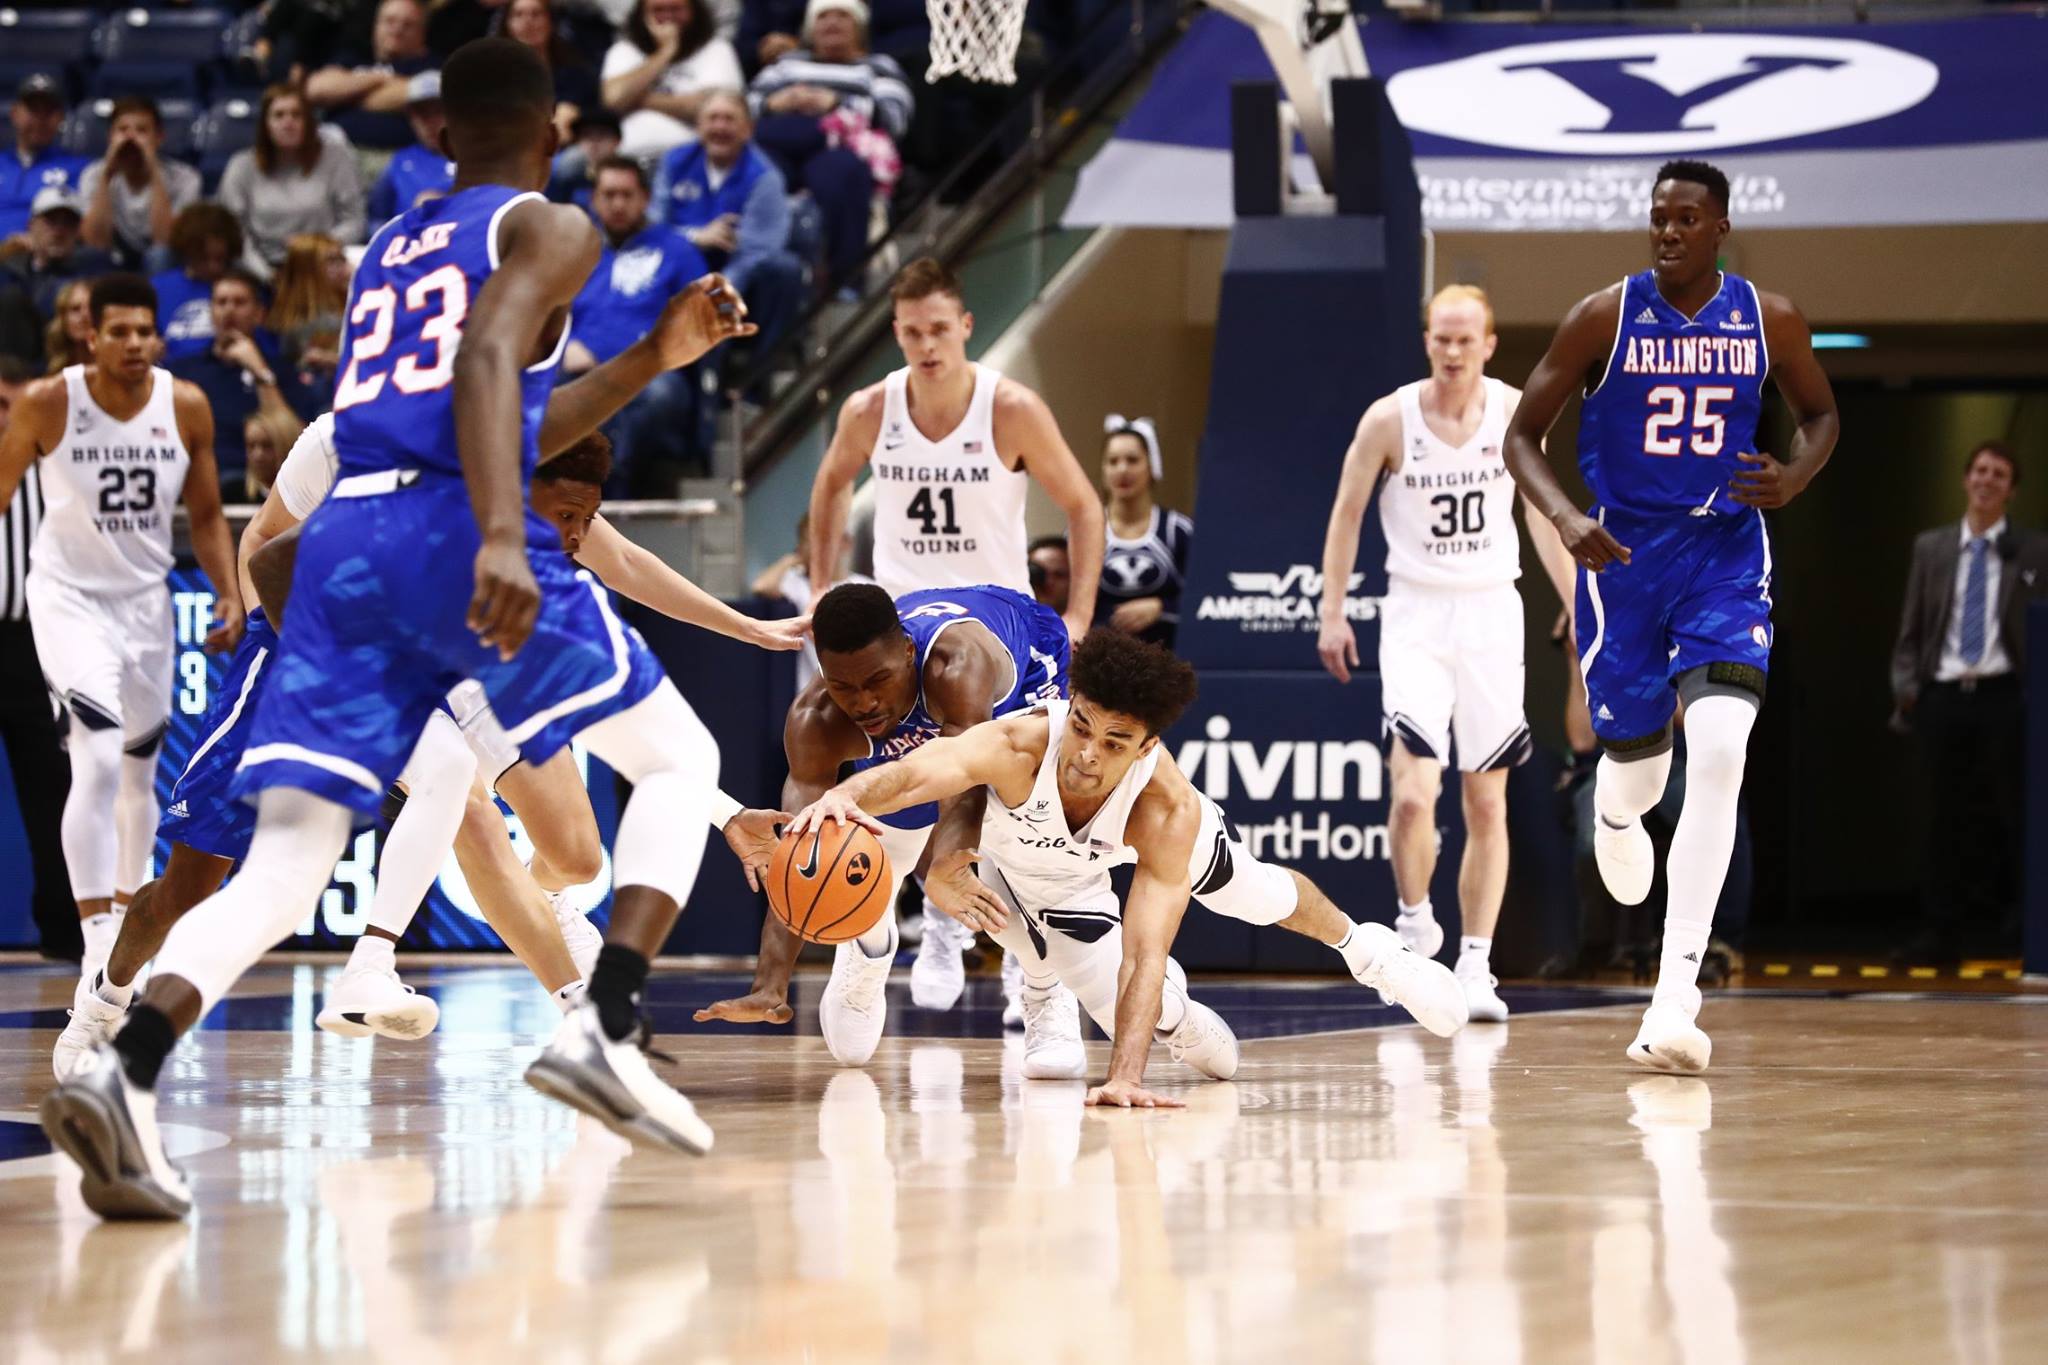 BYU men’s basketball drops first game 8975 to UTArlington